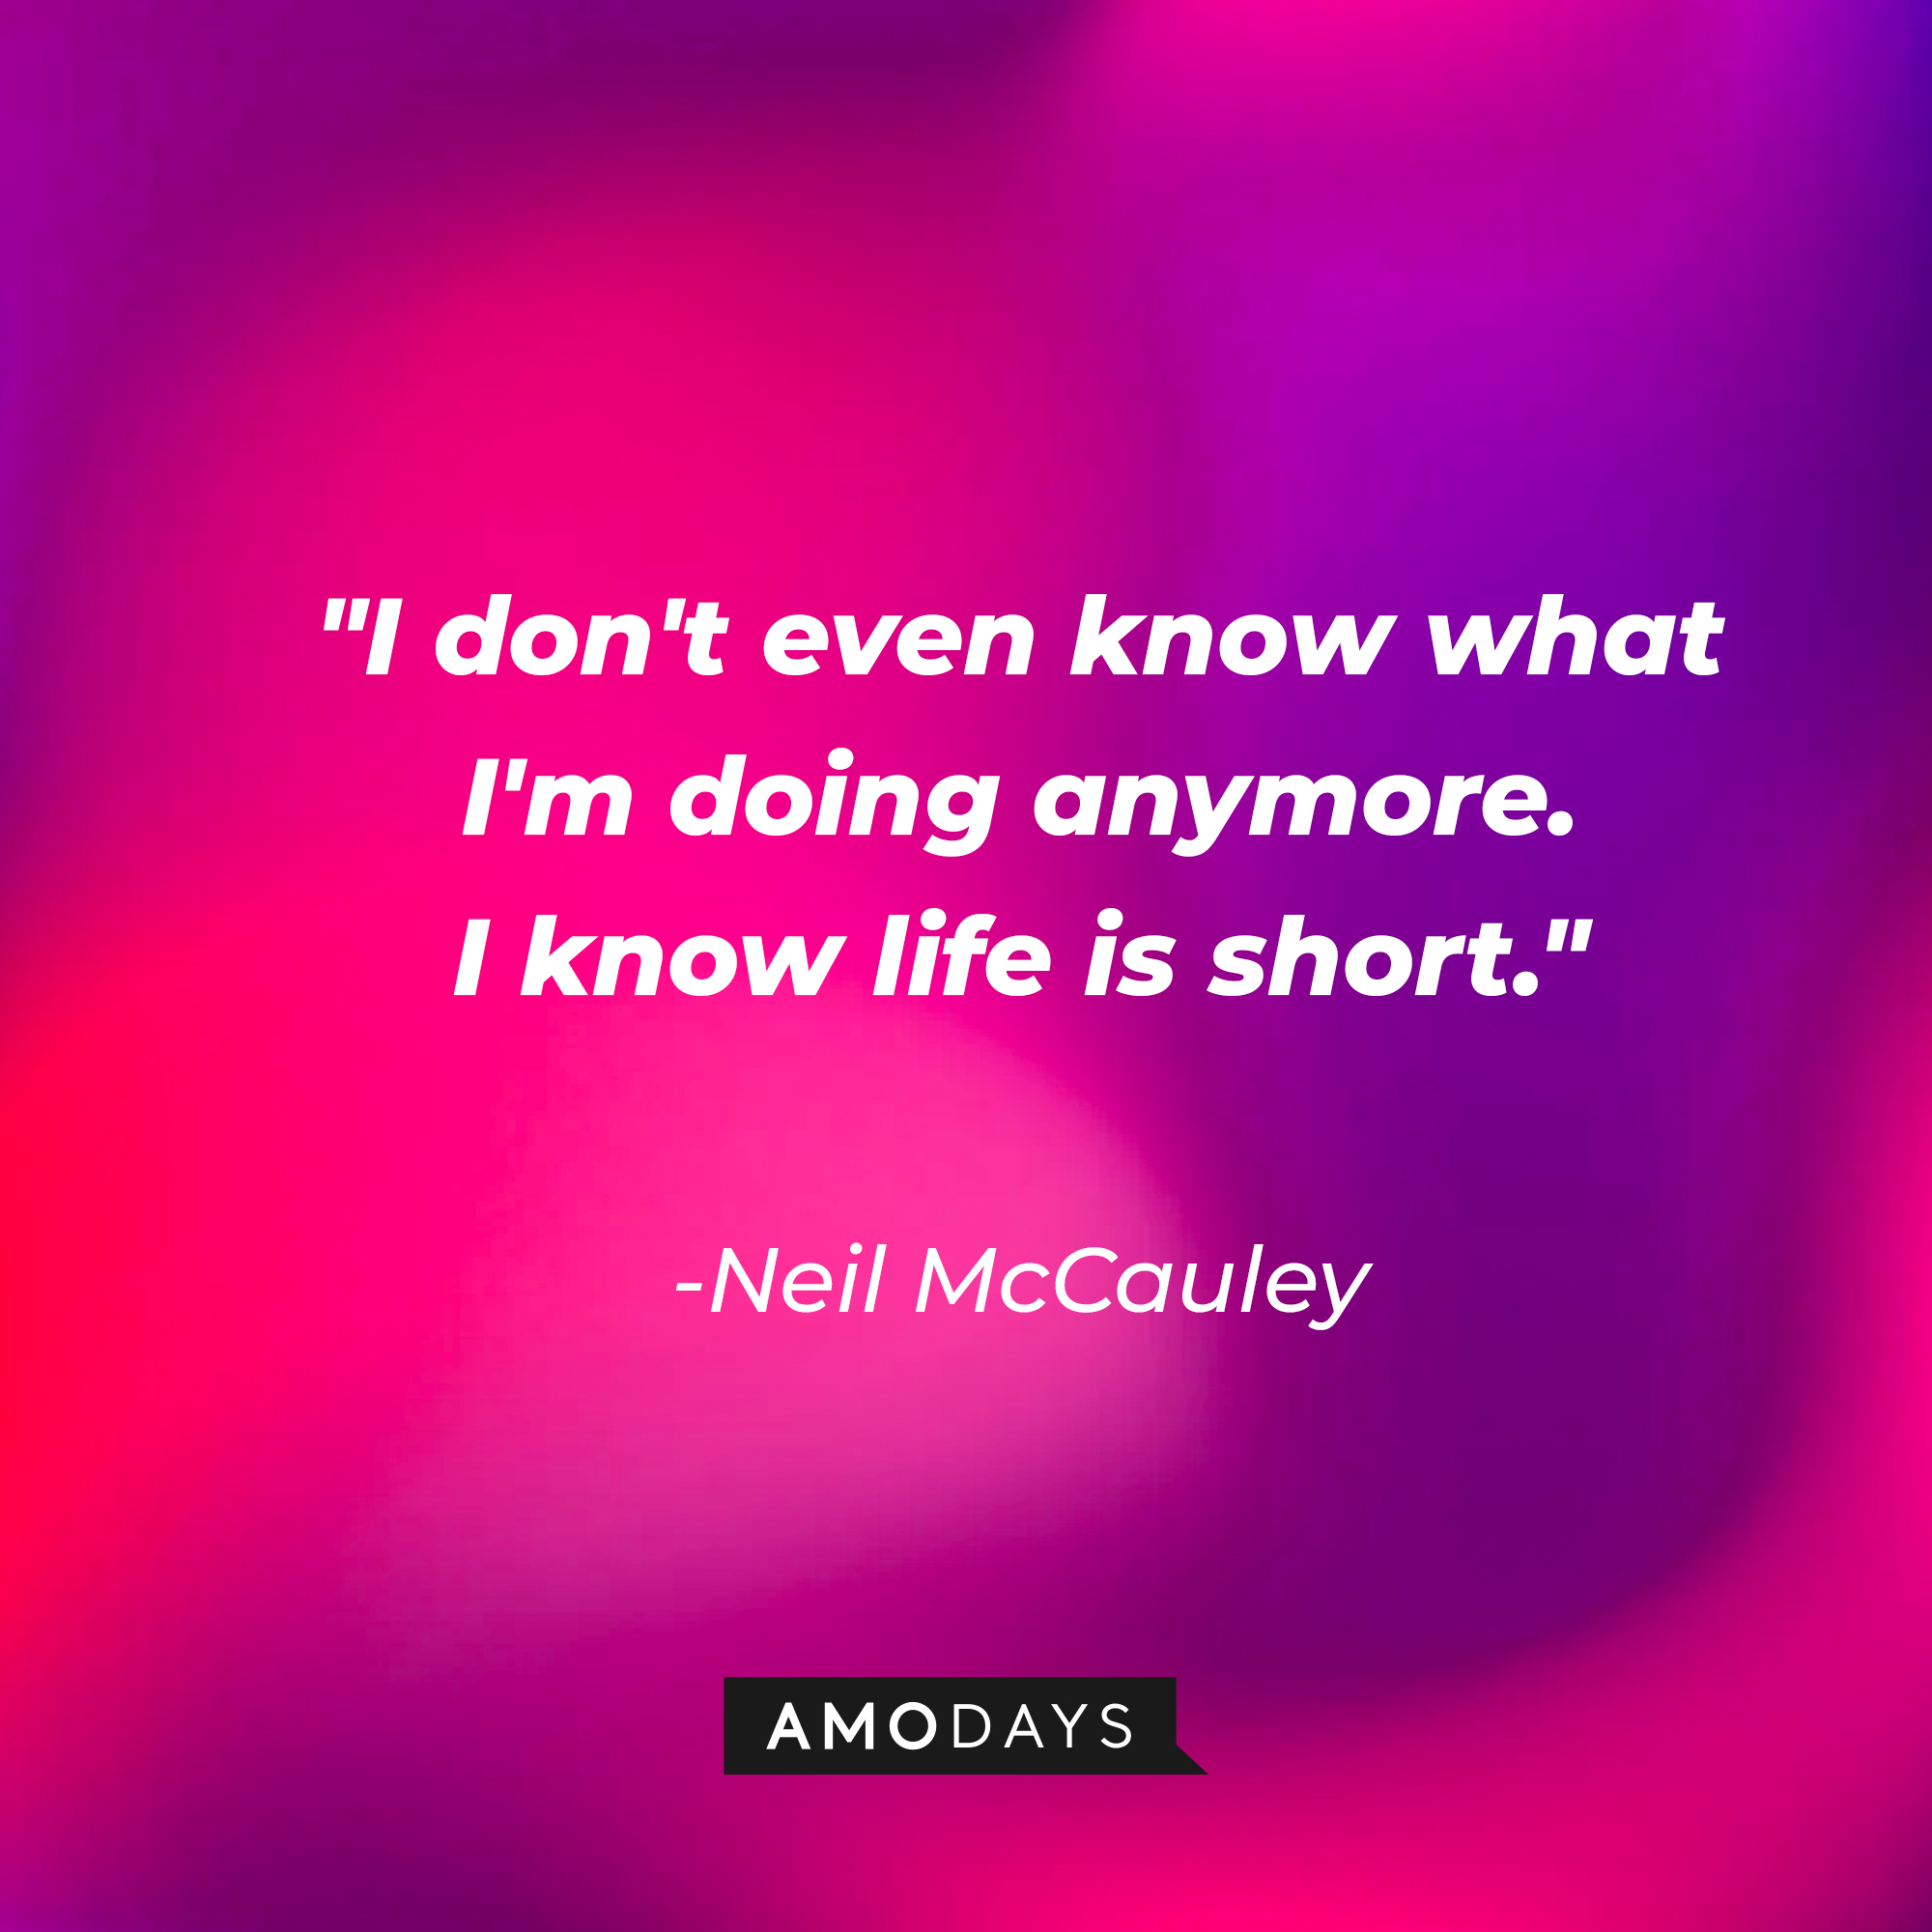 Neil McCauley's quote: "I don't even know what I'm doing anymore. I know life is short." | Source: AmoDays